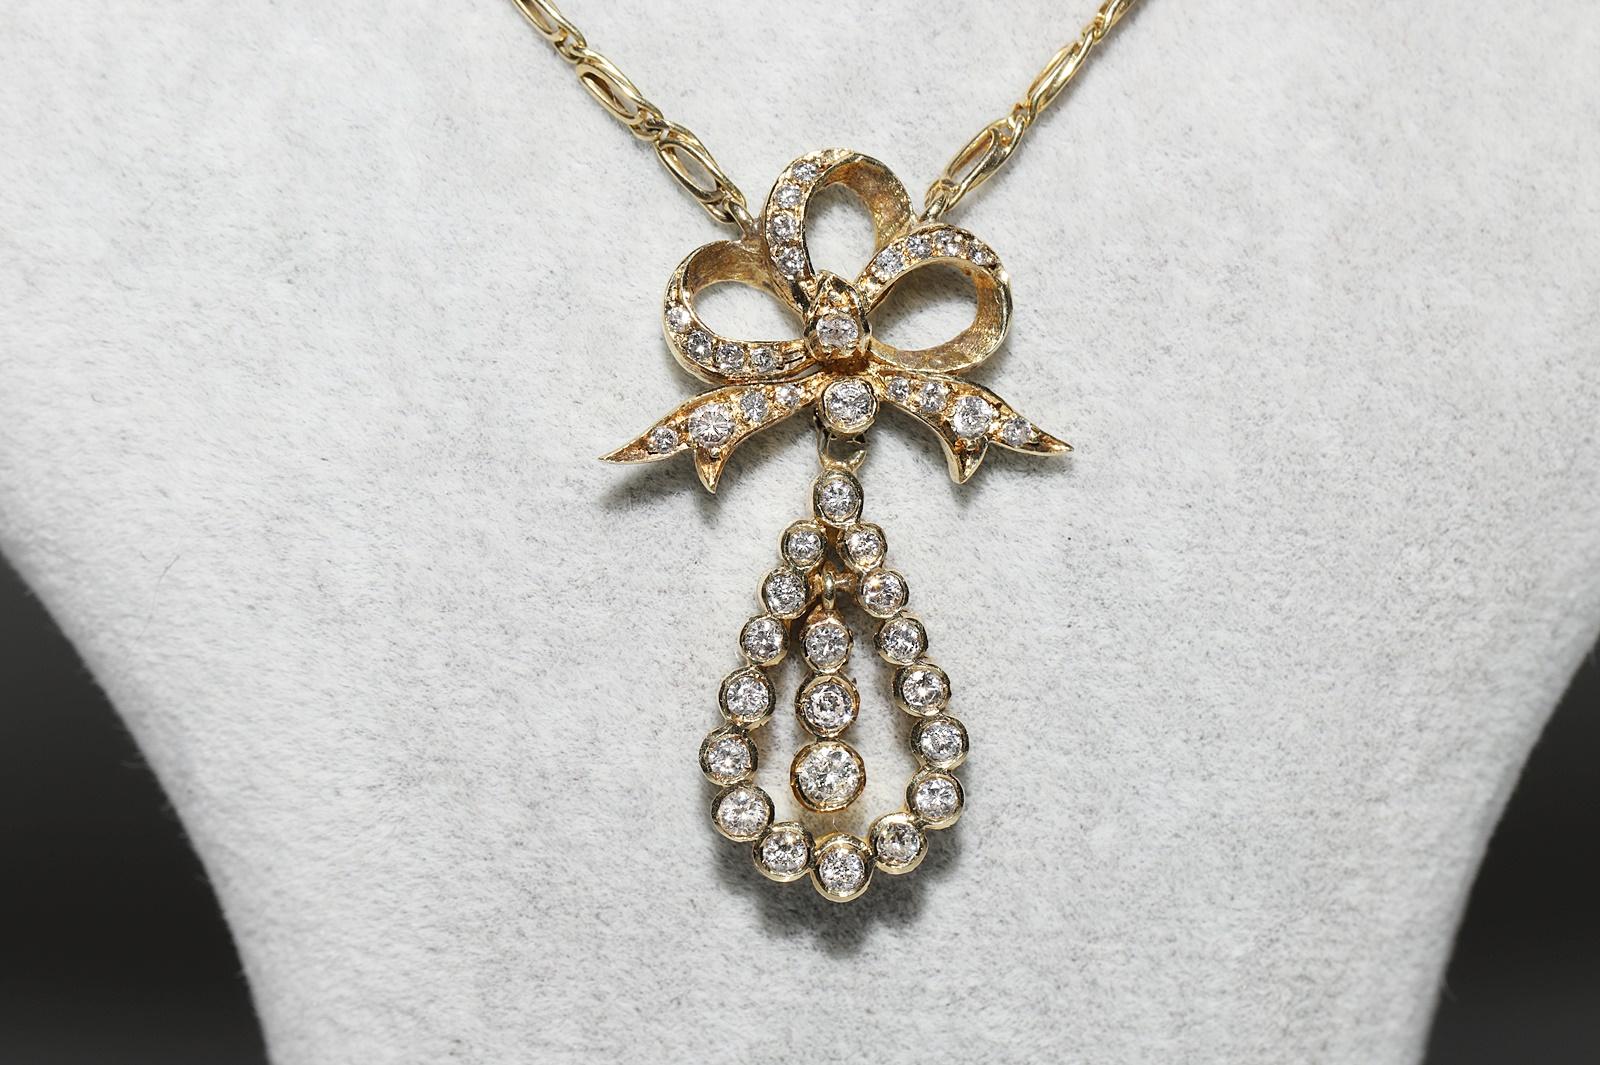 Retro Vintage 14k Gold Circa 1970s Natural Diamond Decorated Amulet Necklace  For Sale